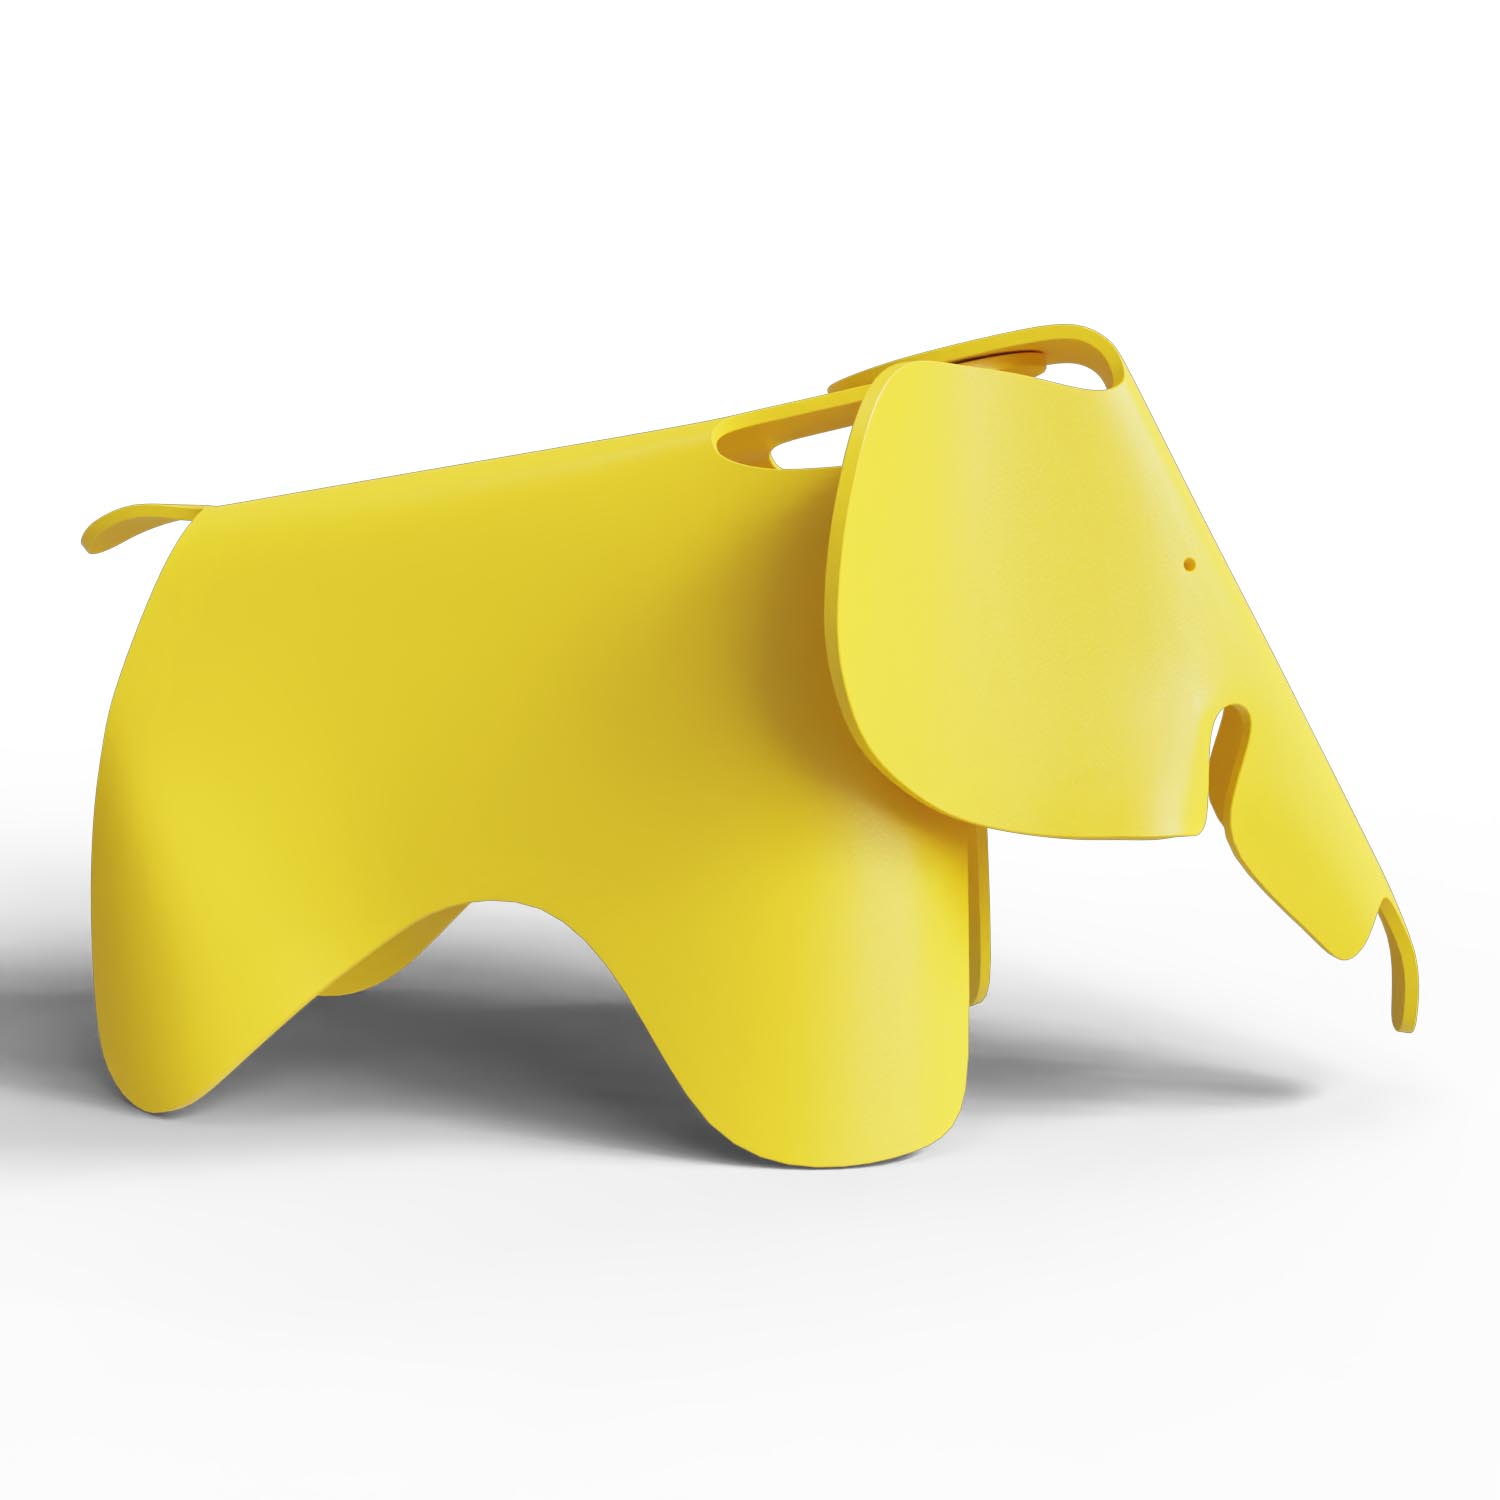 Großer Eames Elephant - Butterblume 21502909